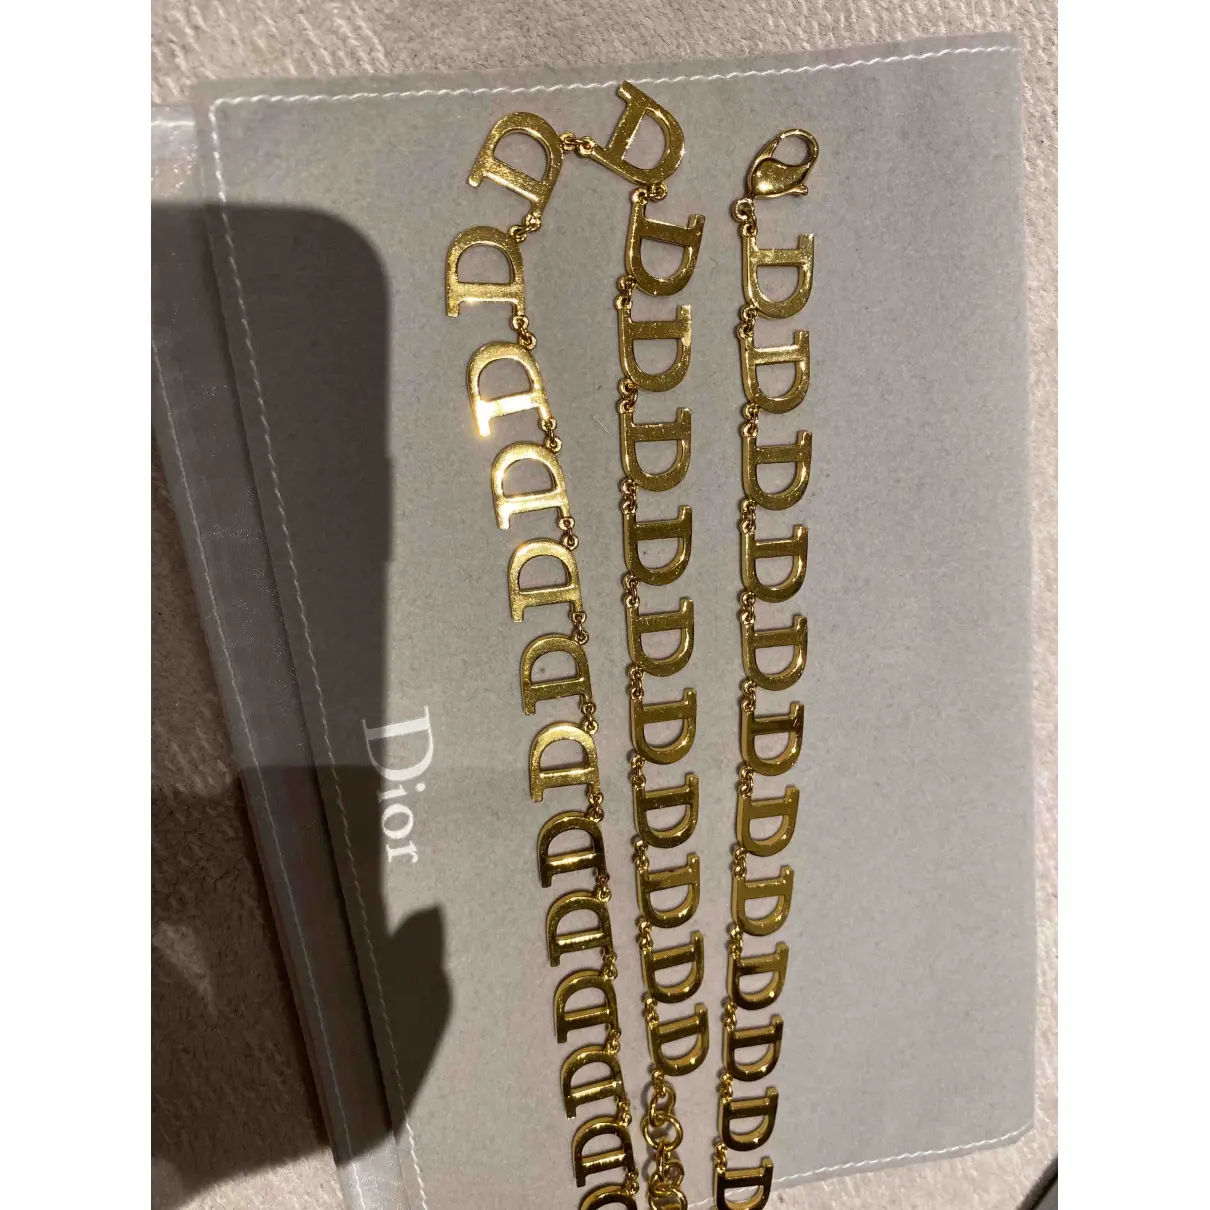 Luxury Christian Dior Necklaces Women